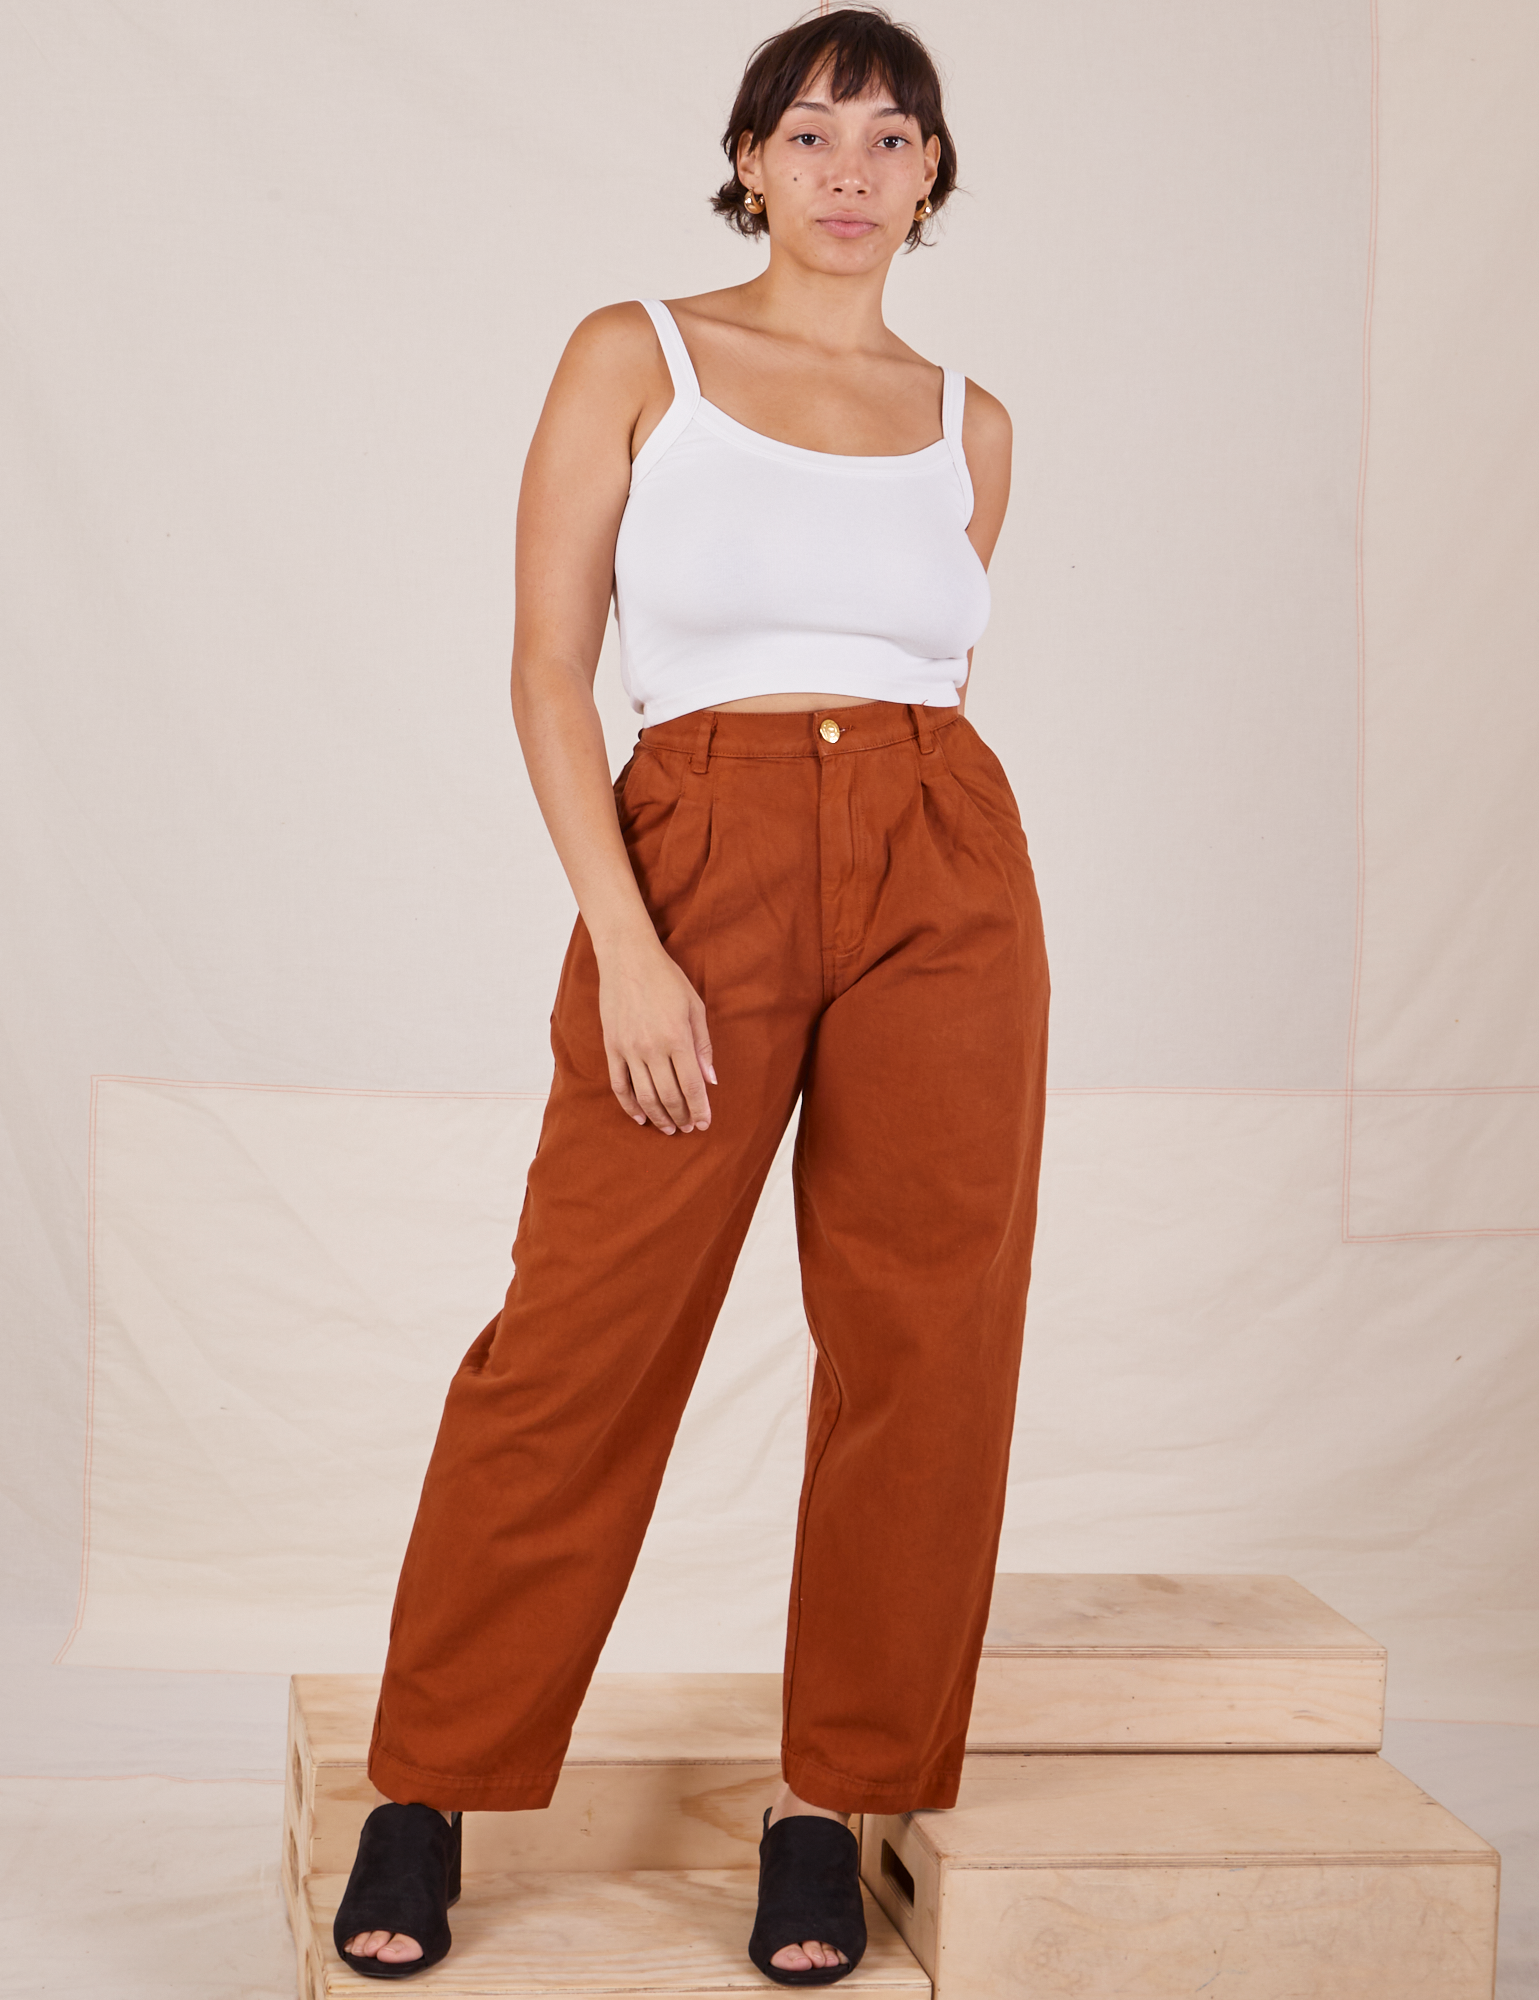 Tiara is 5&#39;4&quot; and wearing S Heavyweight Trousers in Burnt Terracotta paired with Cropped Cami in vintage off-white